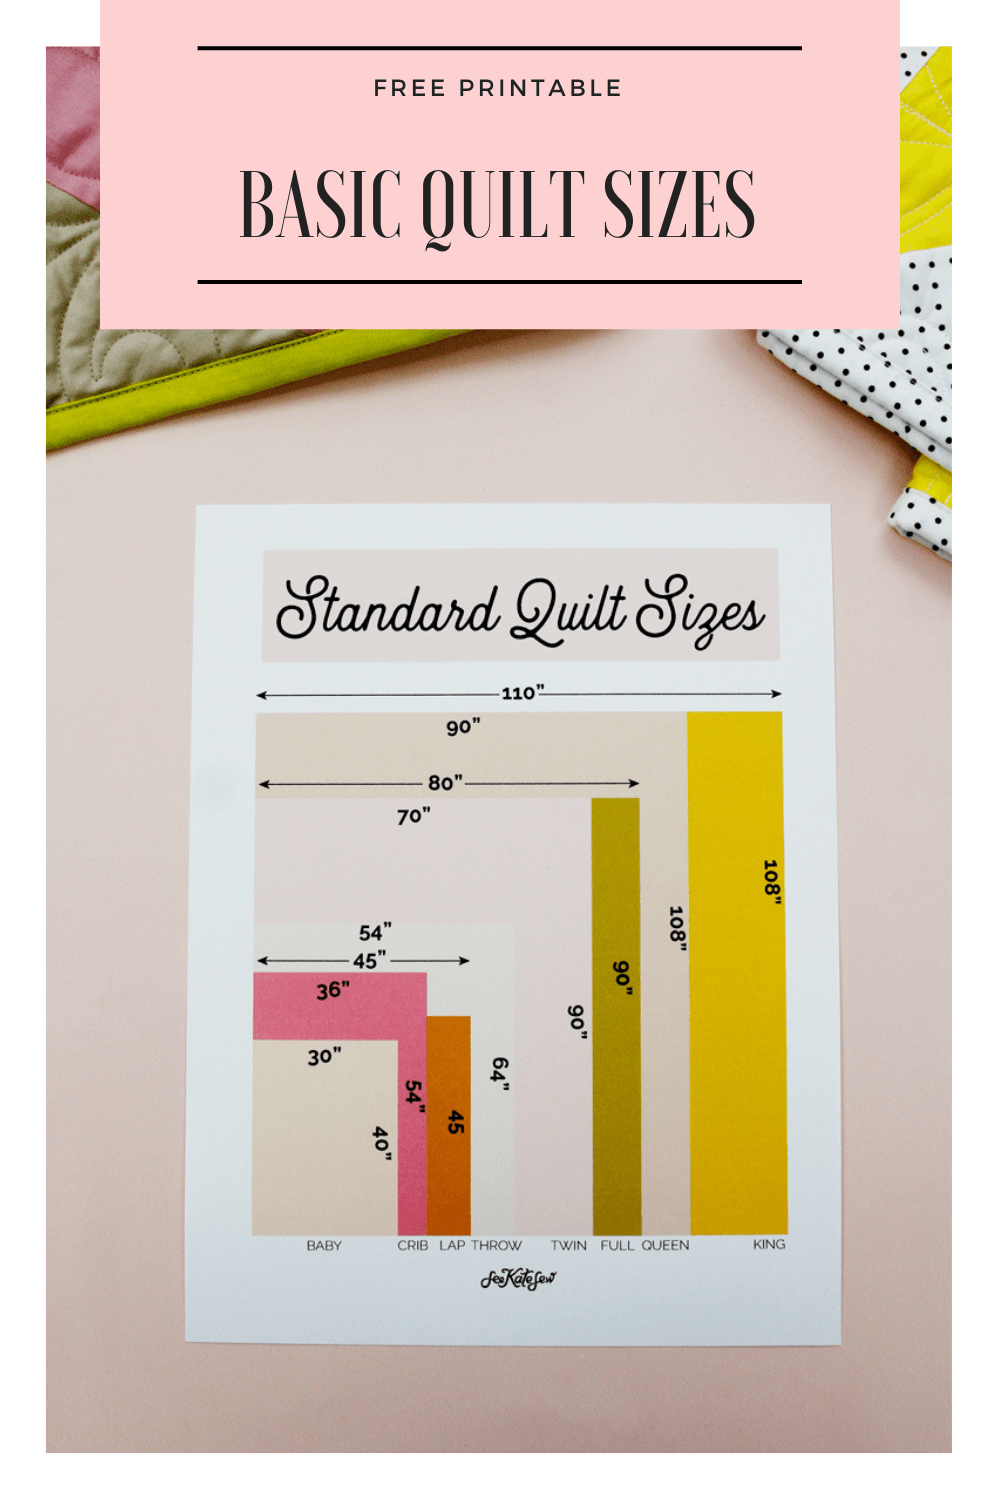 Standard Quilt Sizes Chart And Printable See Kate Sew